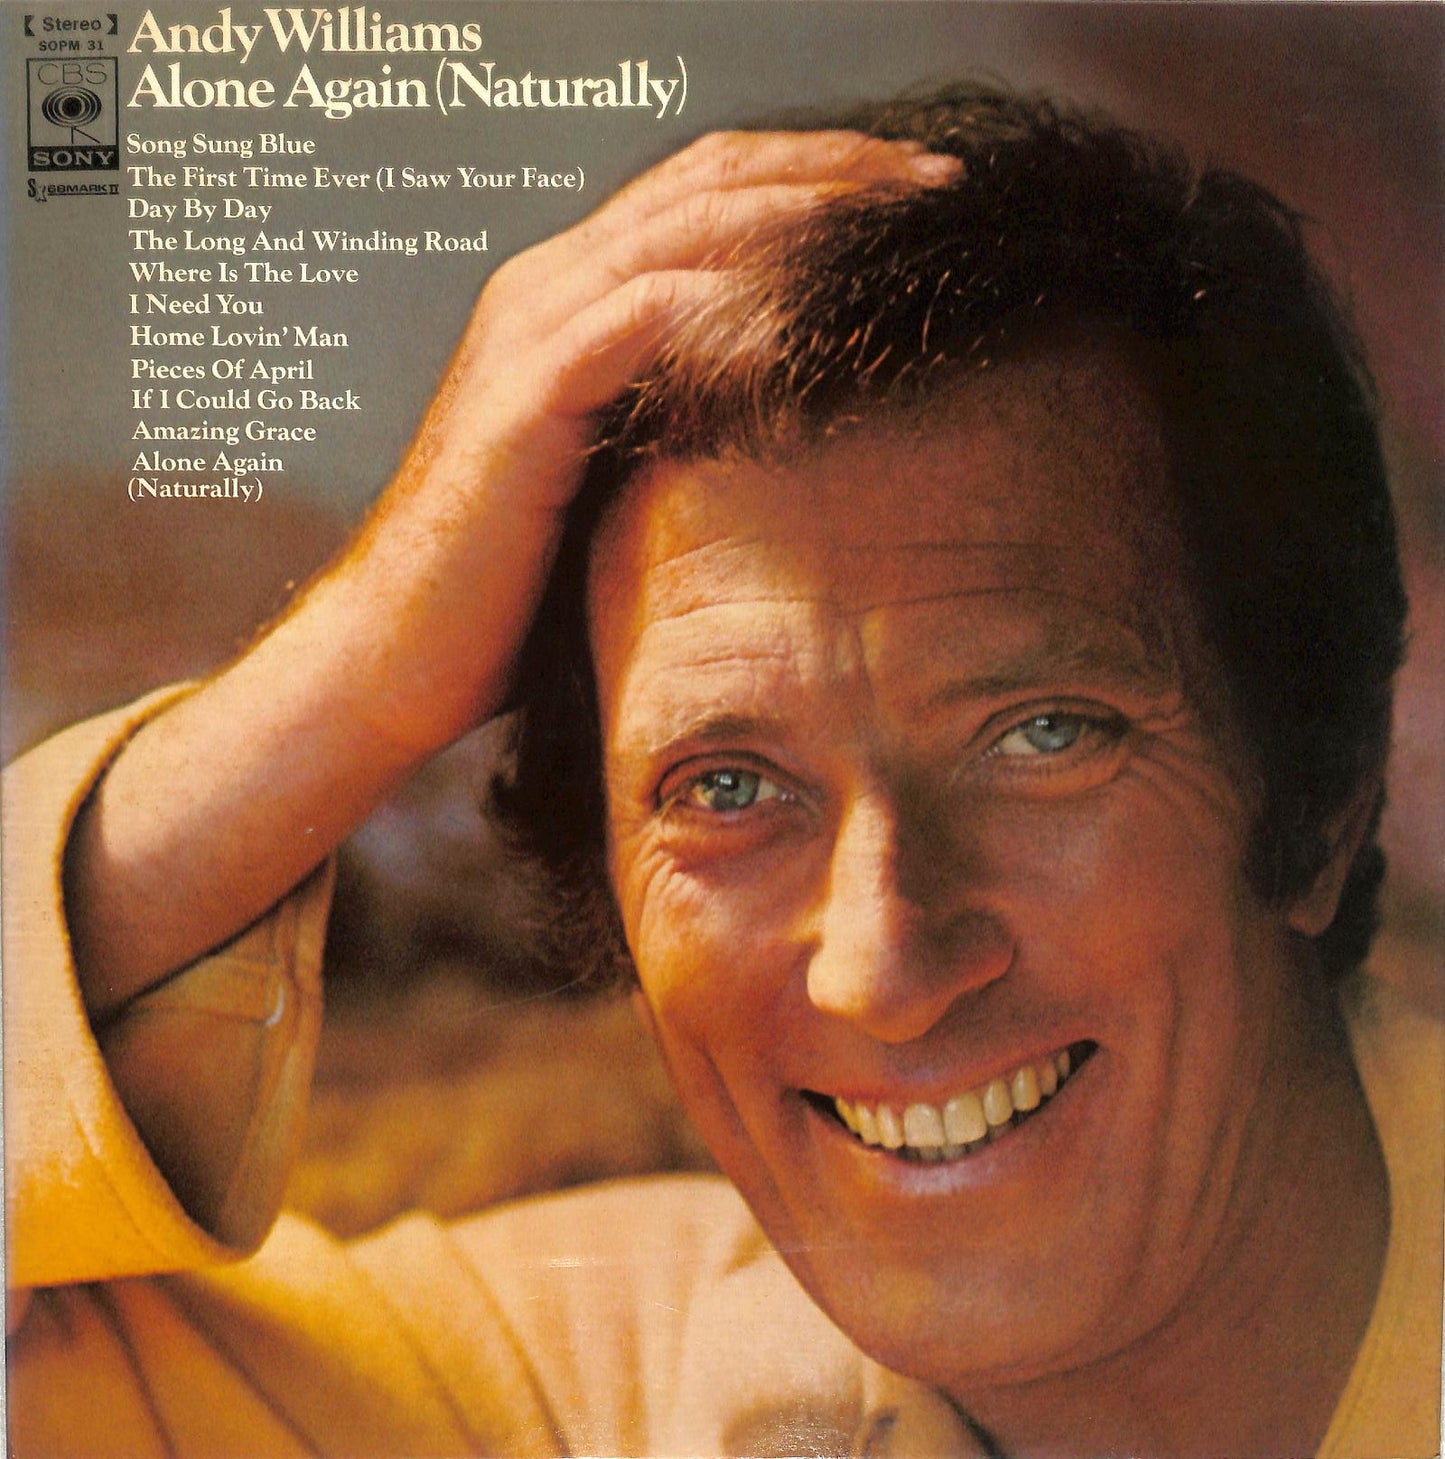 ANDY WILLIAMS - Alone Again (Naturally)